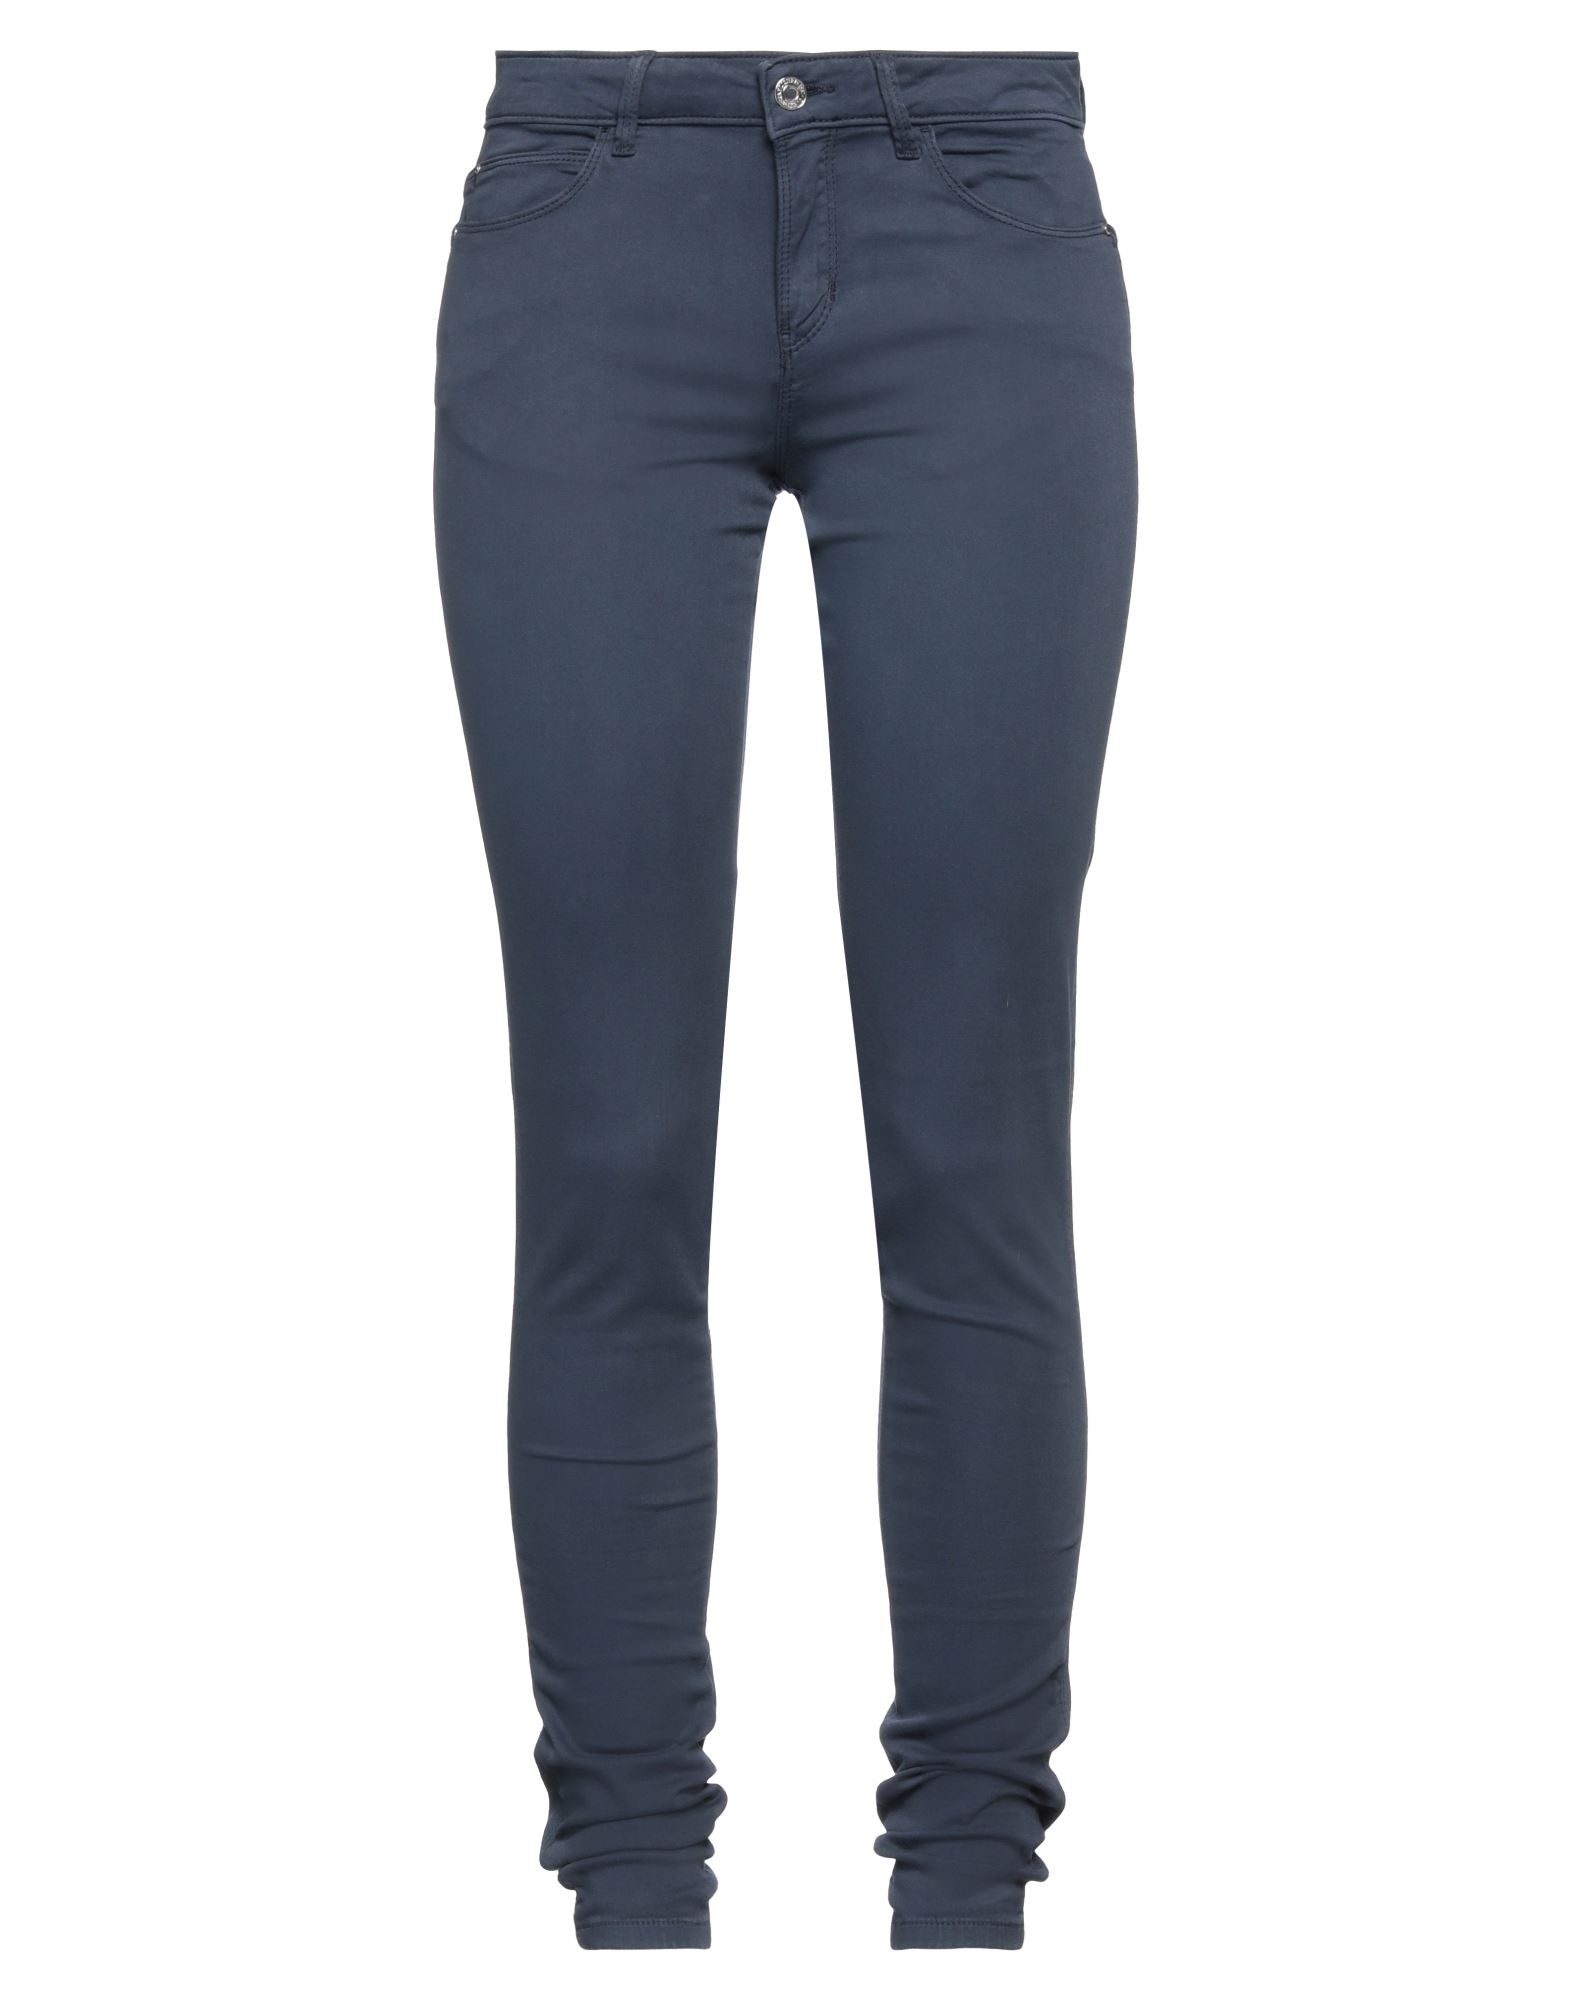 Guess Pants In Navy Blue